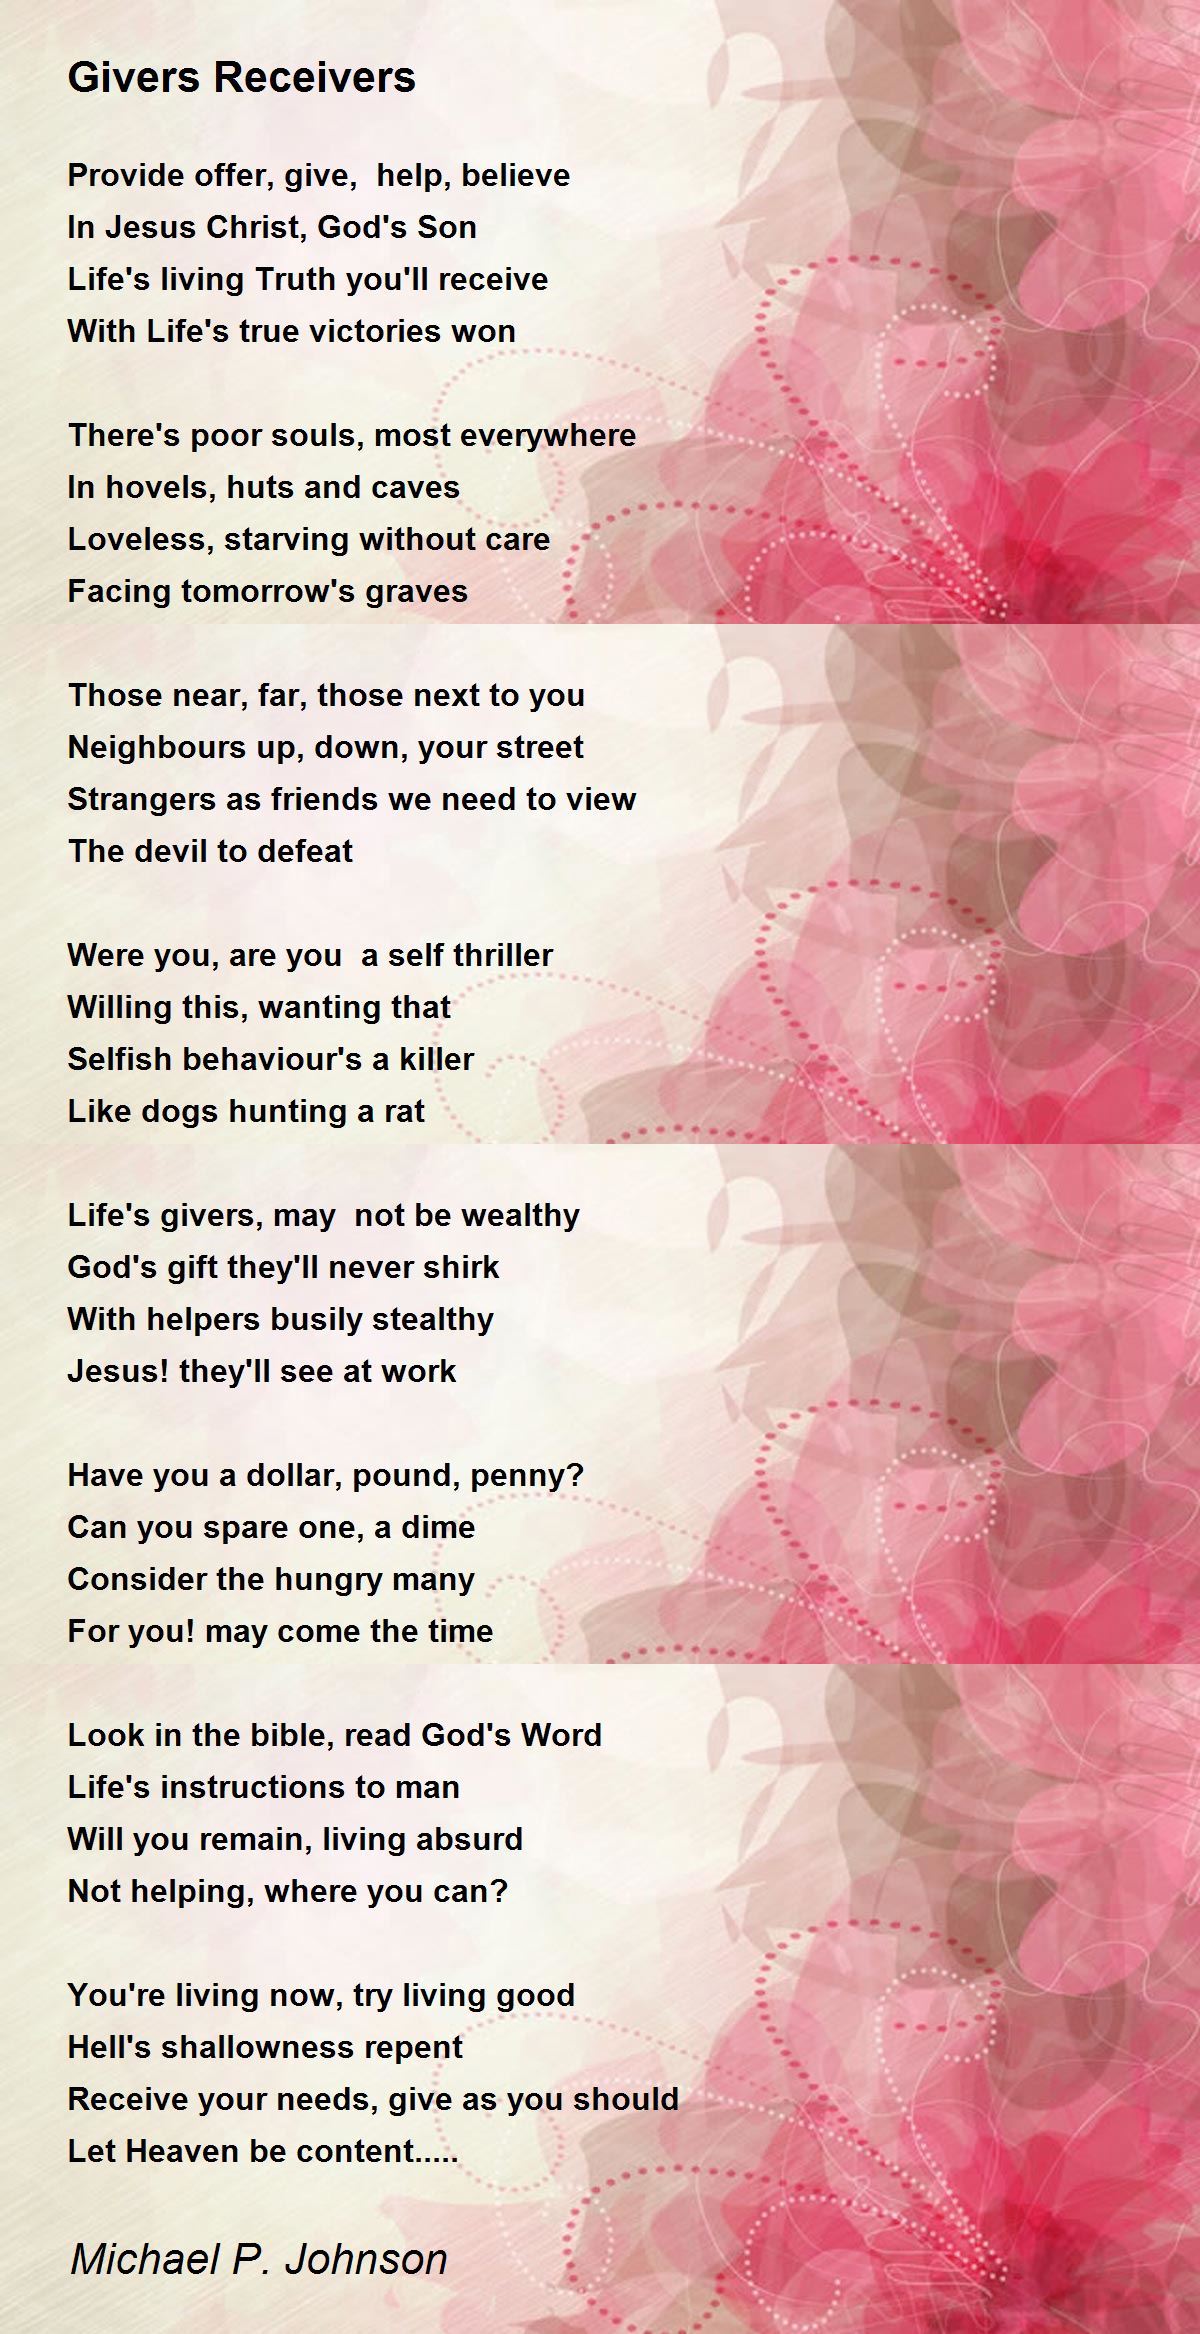 Givers Receivers Poem by Michael P. Johnson - Poem Hunter